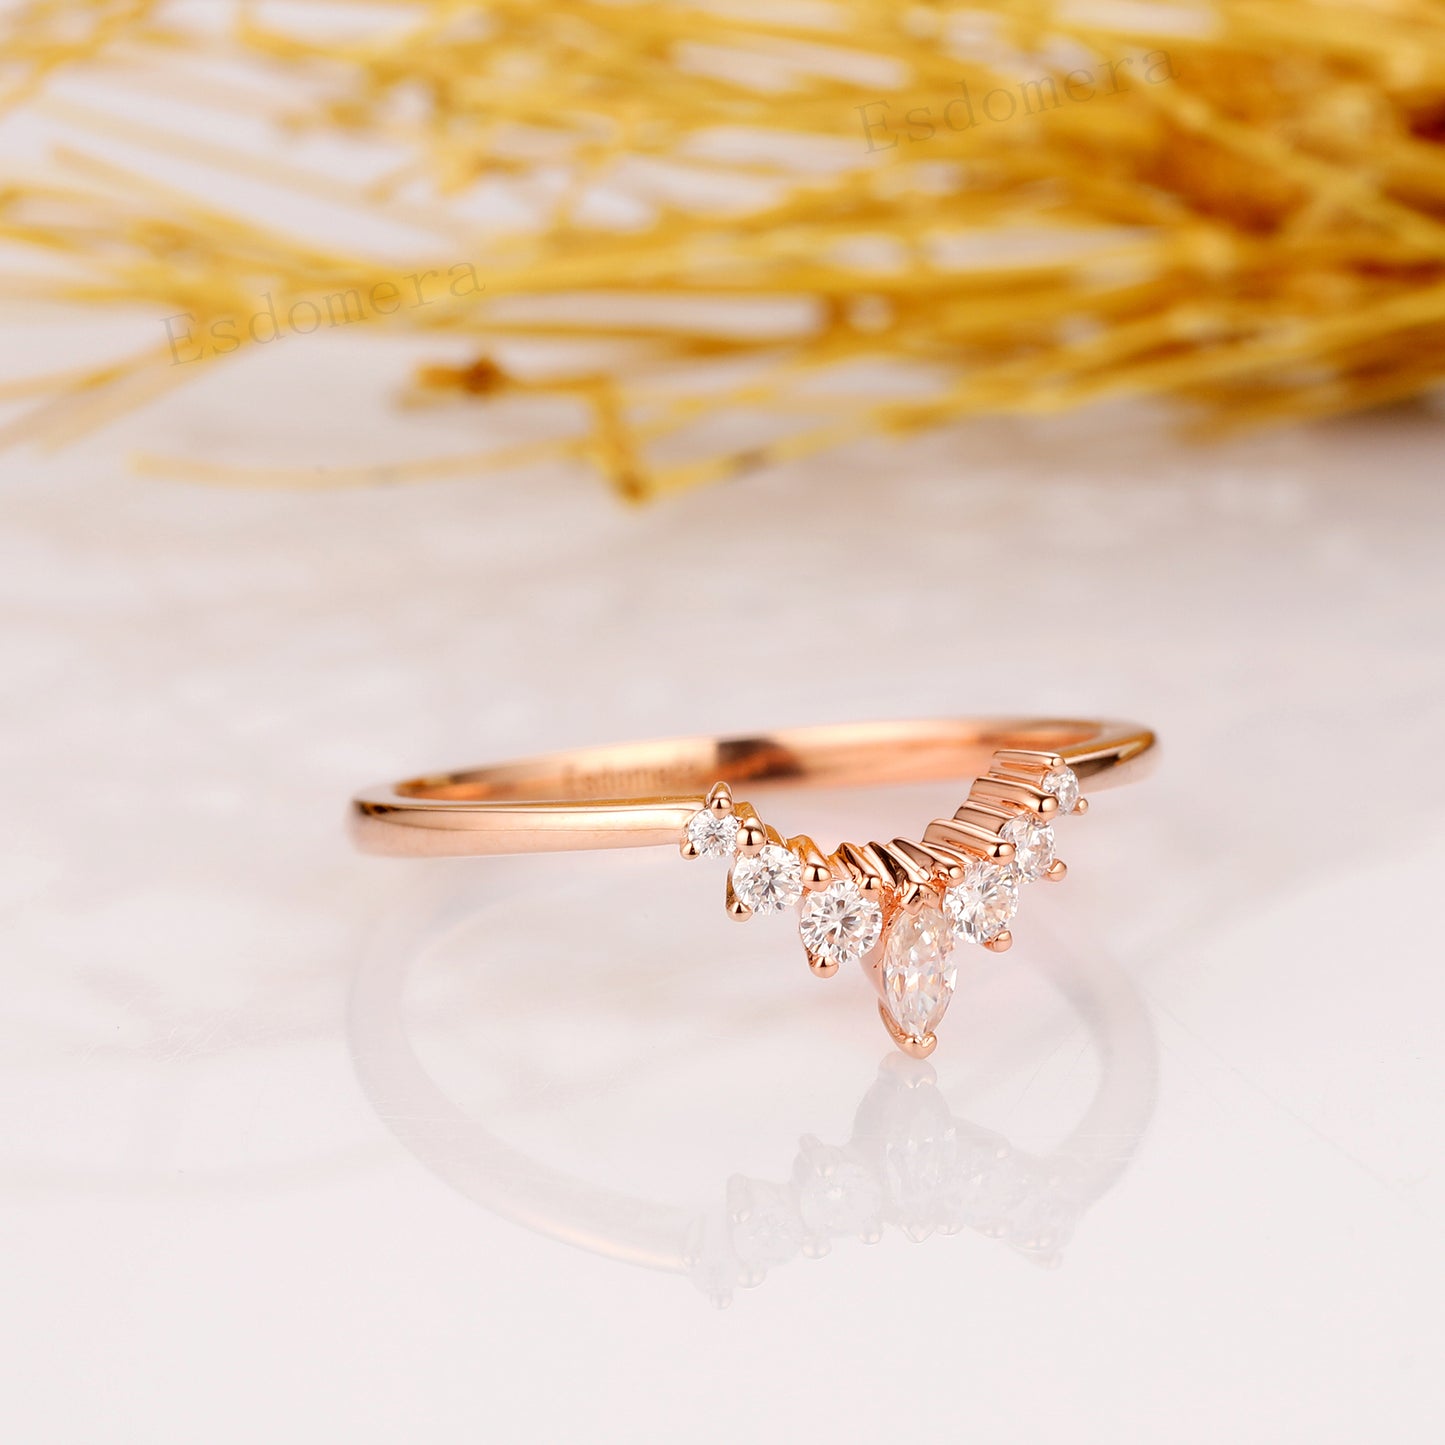 Delicate Moissanite Wedding Band, Special Design Matching Ring, Solid 14K Rose Gold Wedding Ring